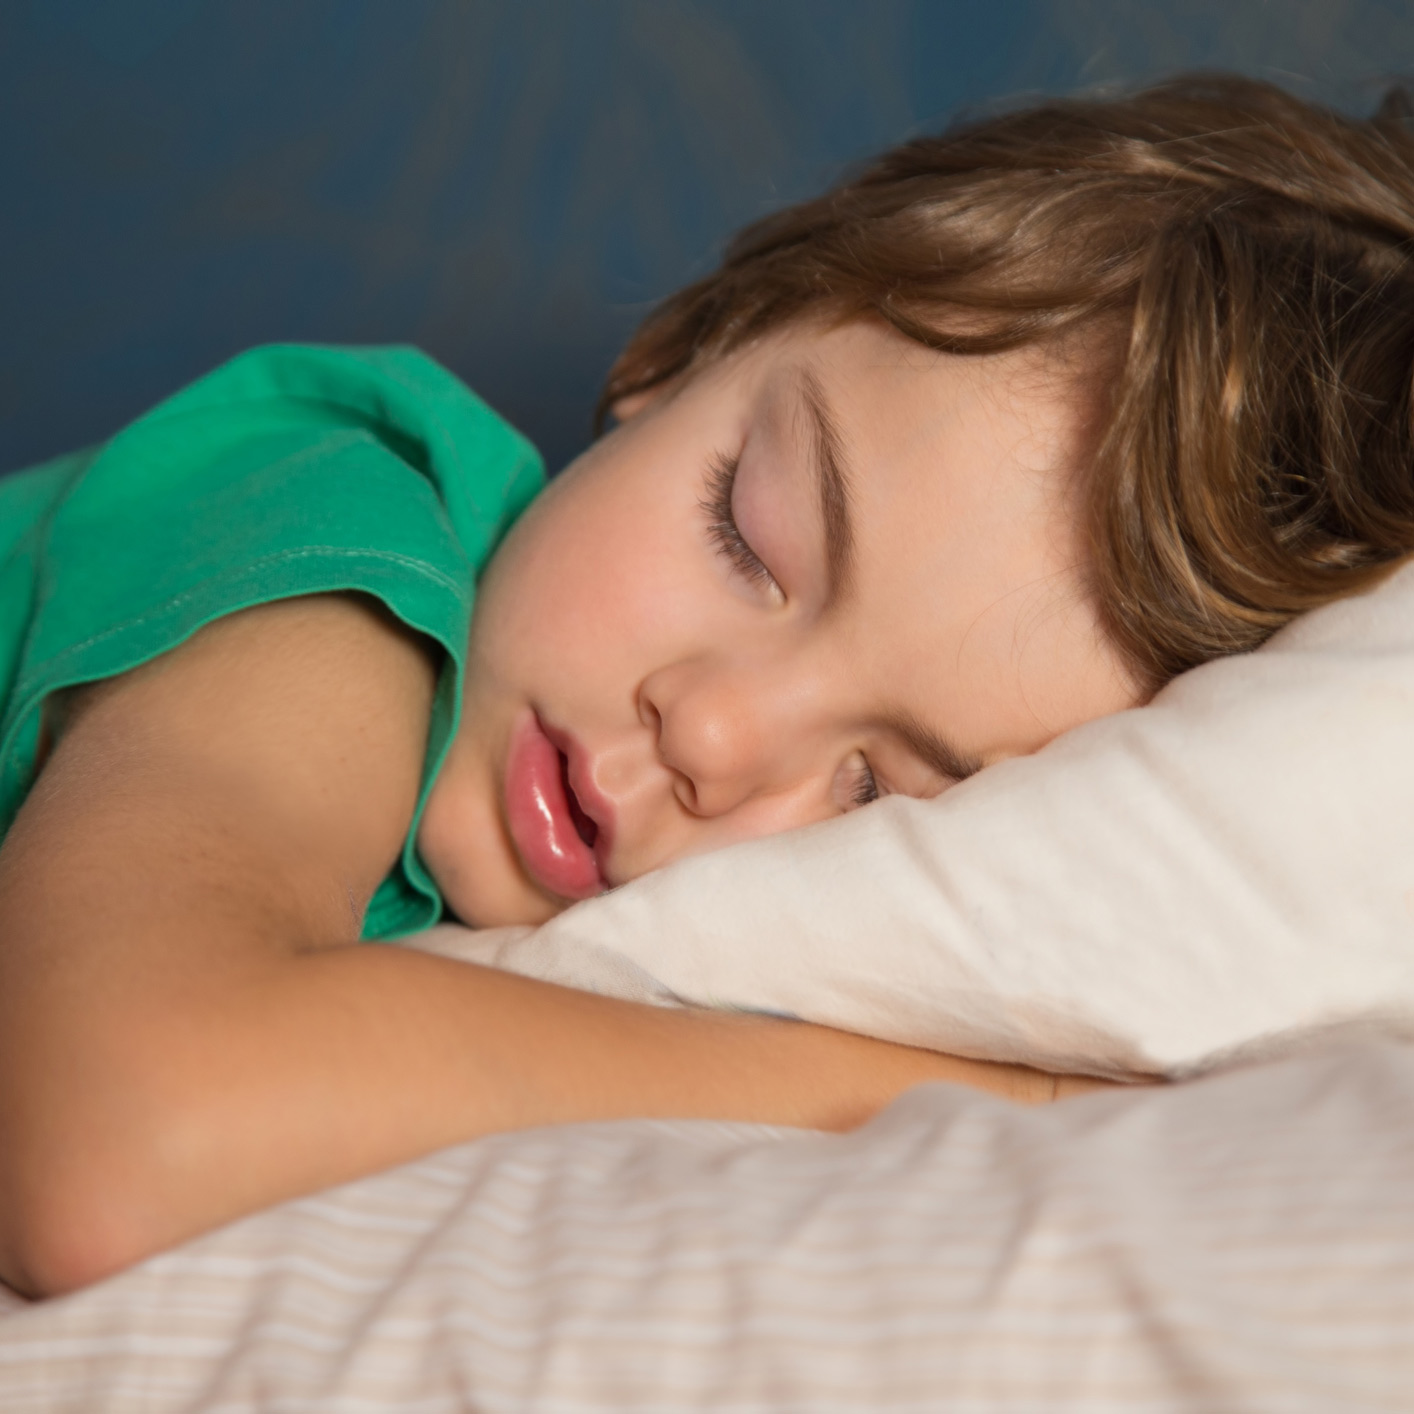 Tips to prevent bedwetting